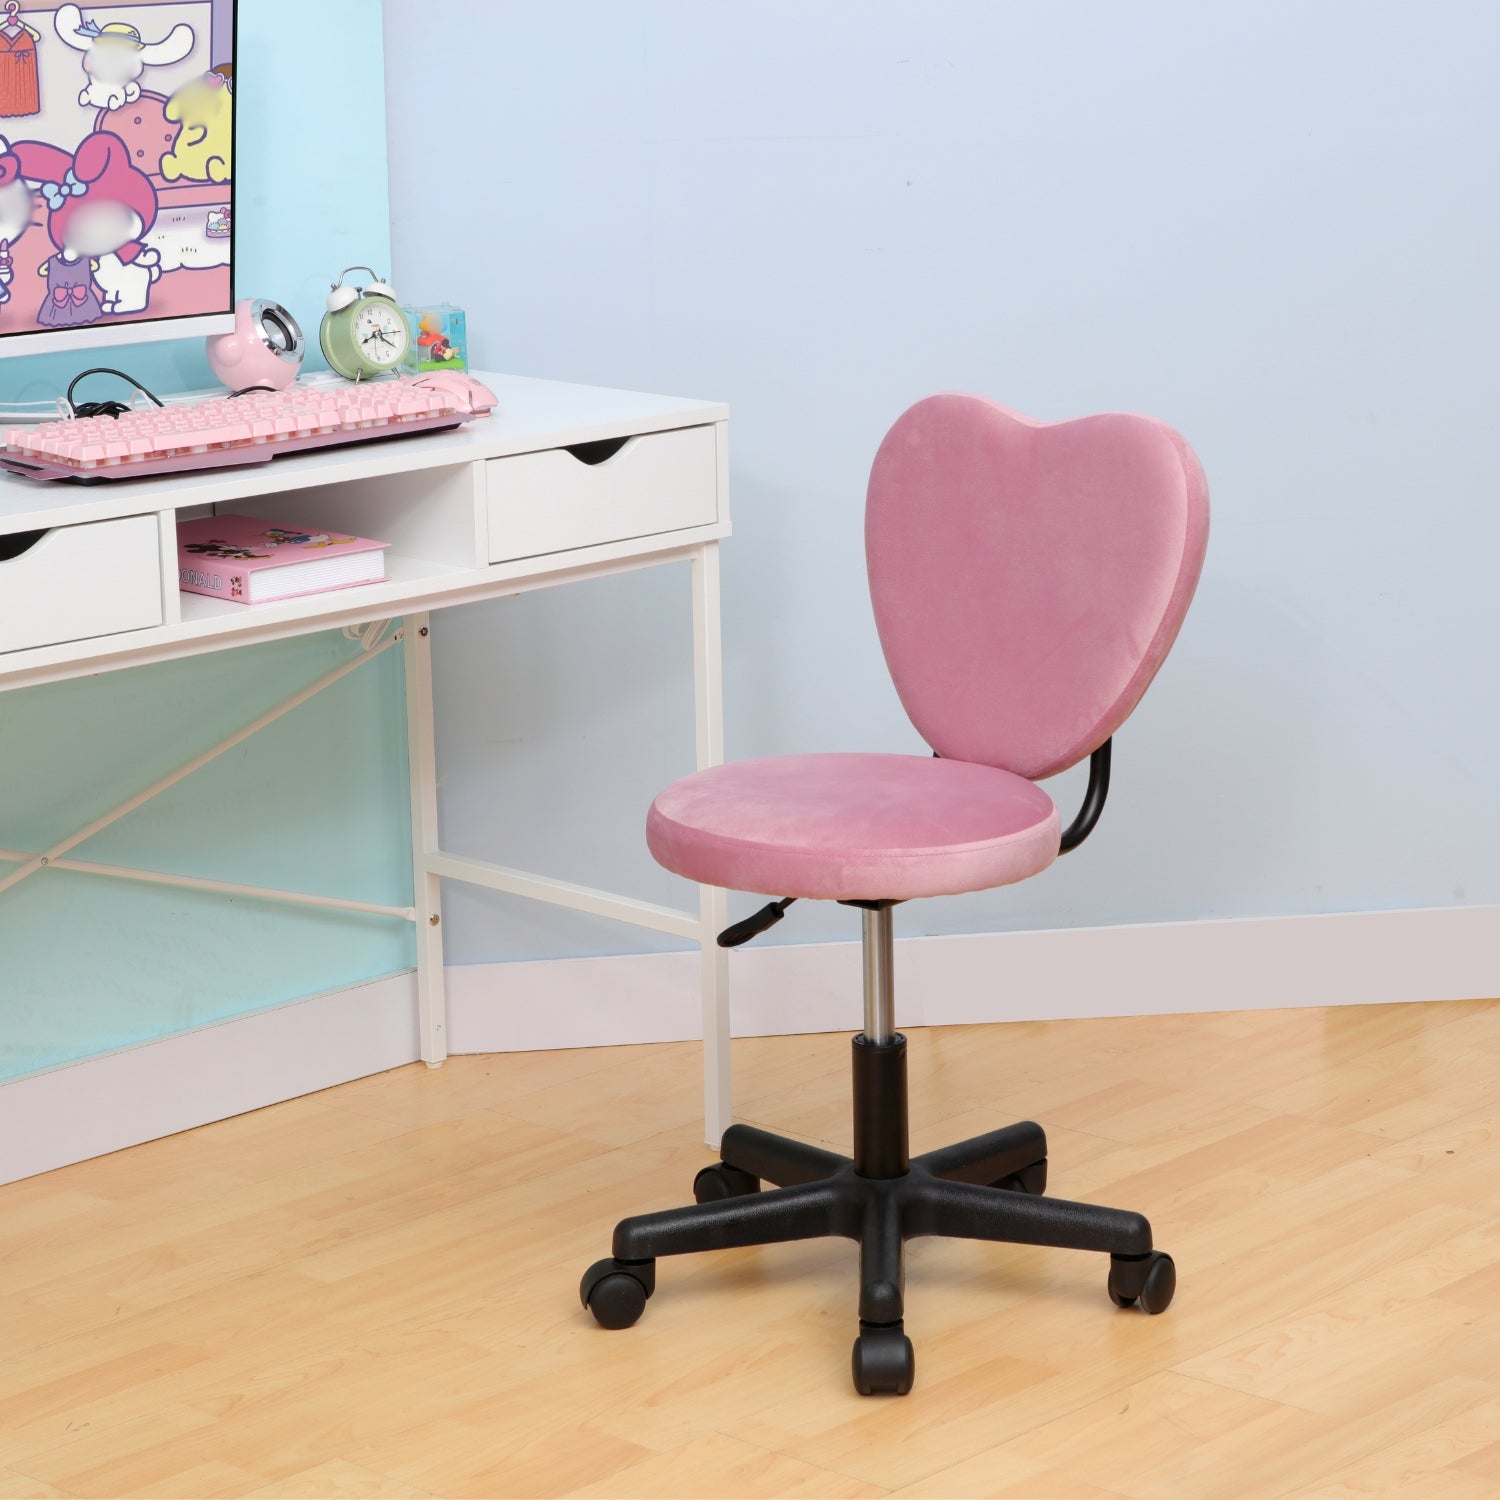 Chatka pink velvet computer chair with a heart shaped seat perfect for adding a touch of love to your workspace.